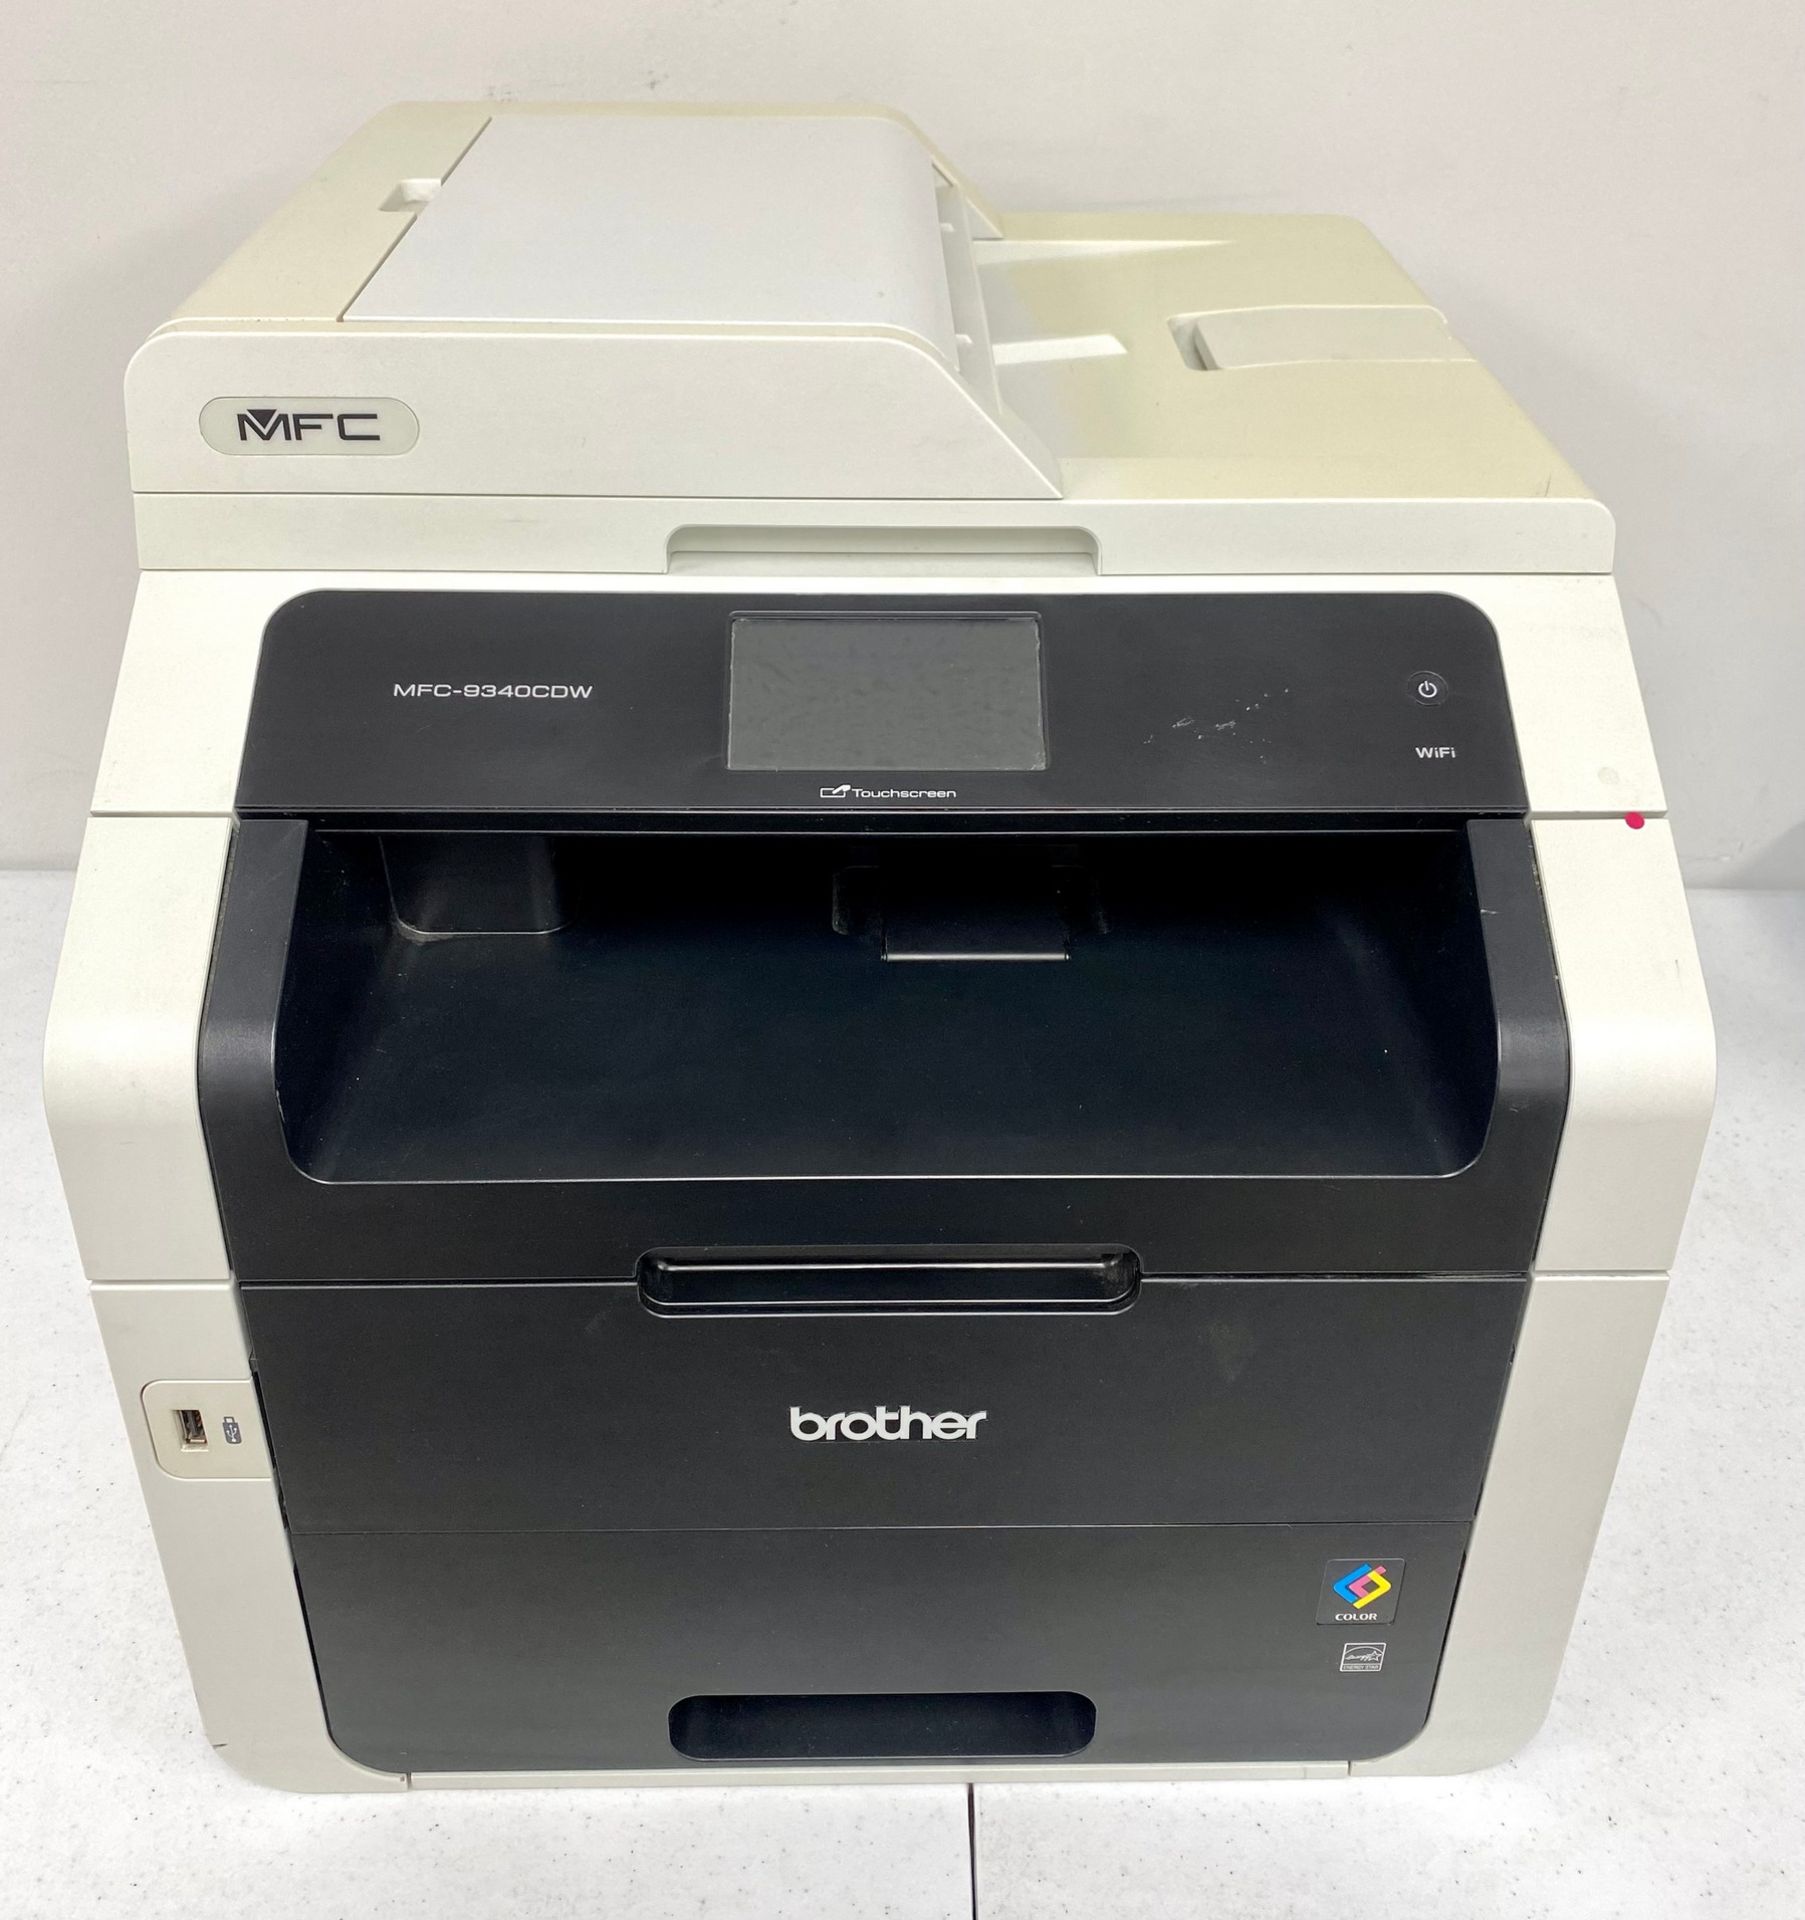 COLLECTION ONLY: A pre-owned Brother MFC-9340 CDW Colour Laser printer with toner (Tested, working).